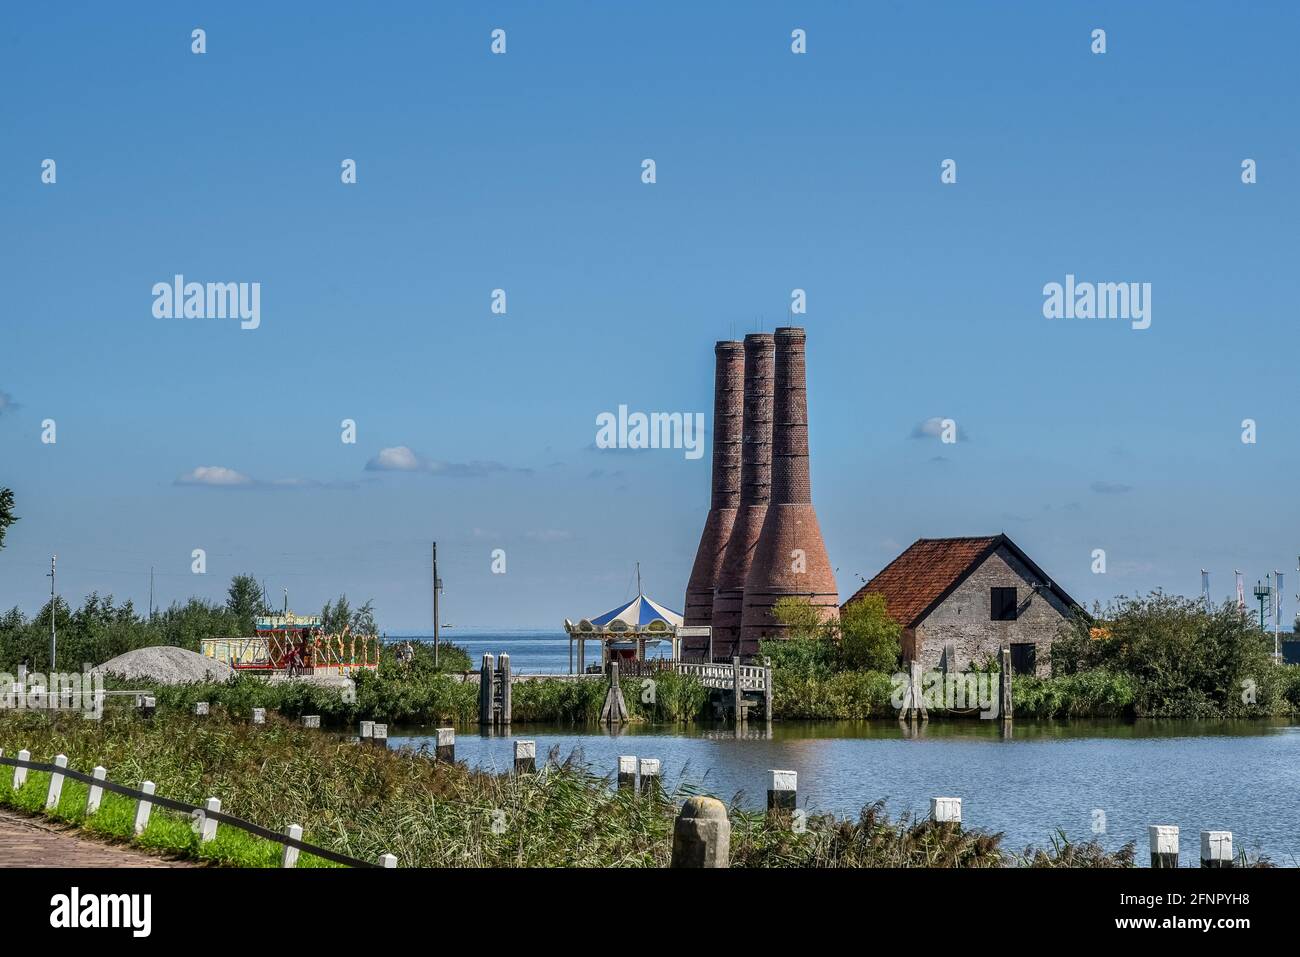 Enkhuizen, the Netherlands - September 2020. The Zuiderzeemuseum; an open air museum at the shore of the IJsselmeer with traditional Dutch fishermen cottages and flat bottomed fishing boats. High quality photo. Stock Photo